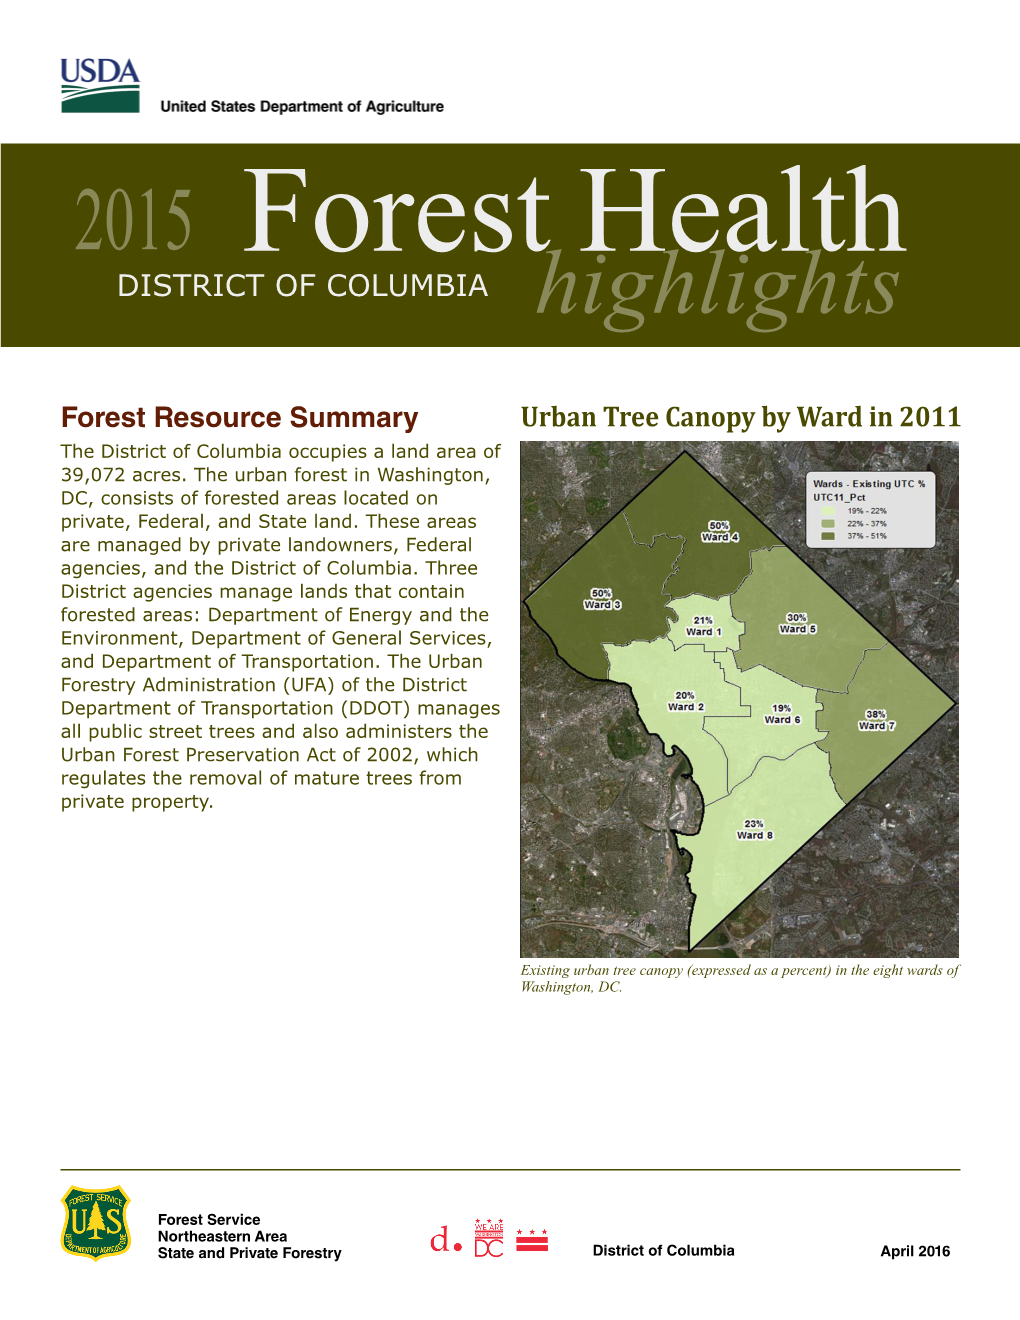 2015 District of Columbia Forest Health Highlights